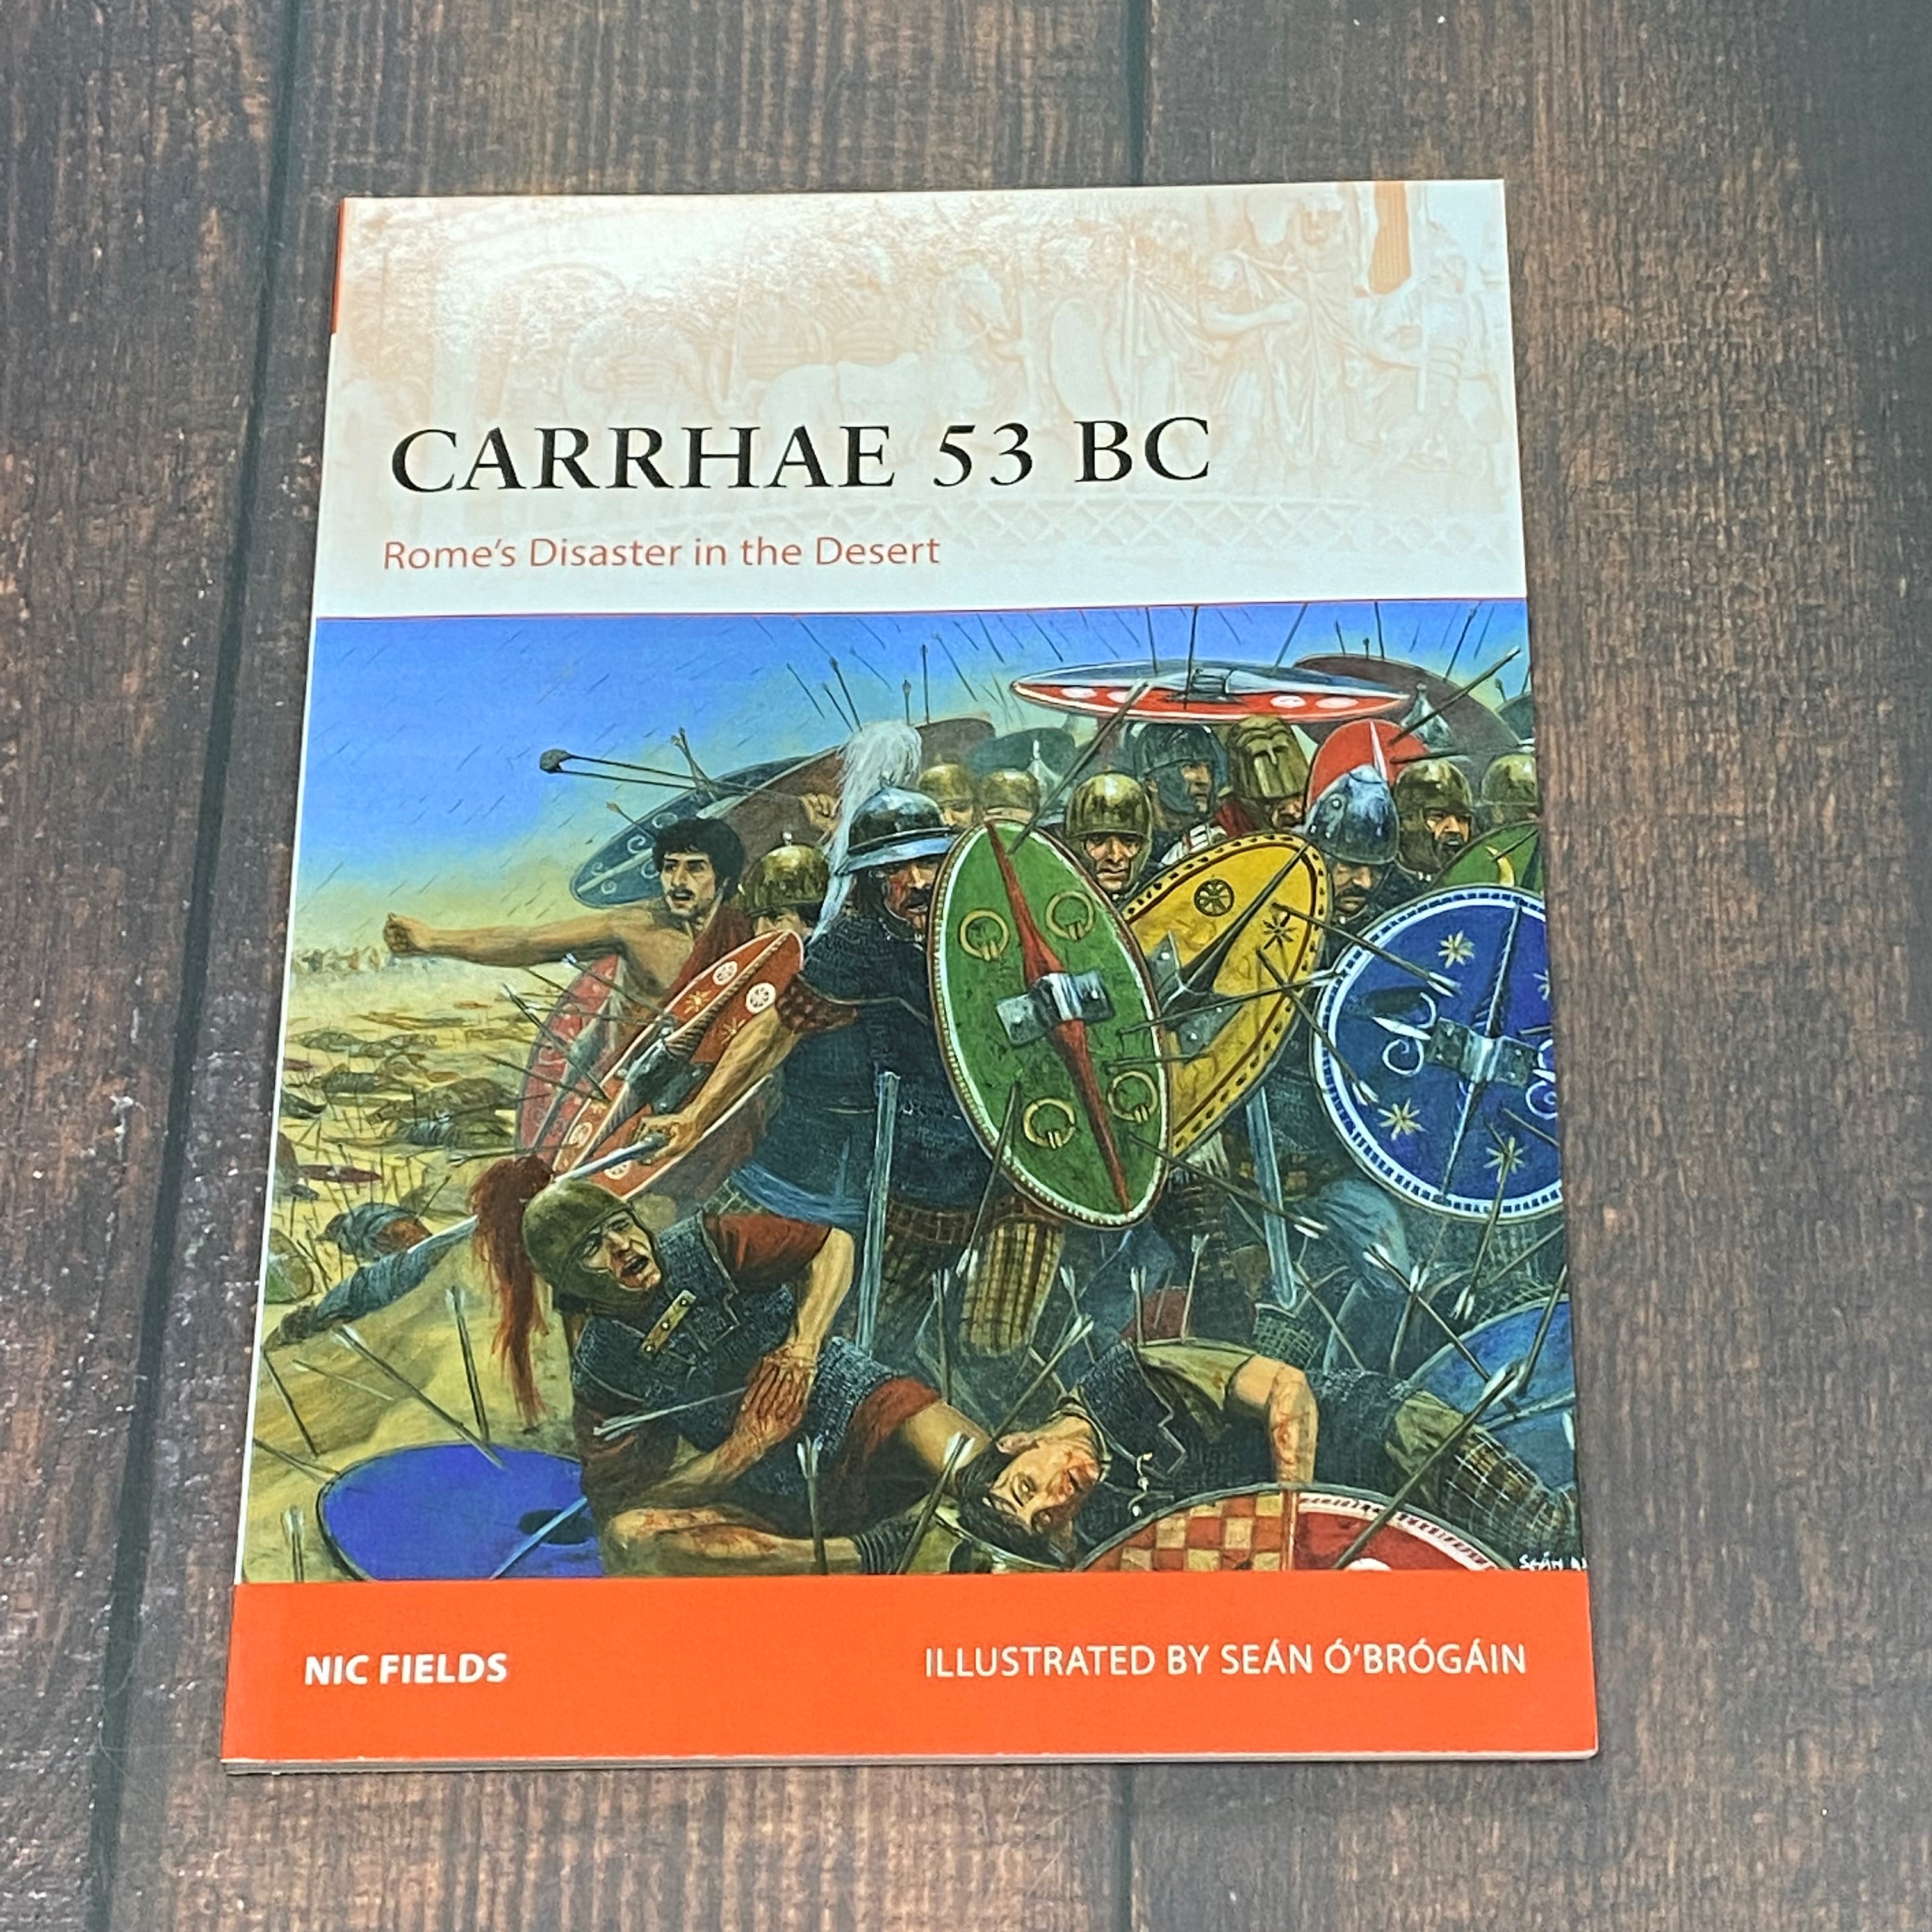 Carrhae 53 BC: Rome's Disaster in the Desert: Campaign Nic Fields